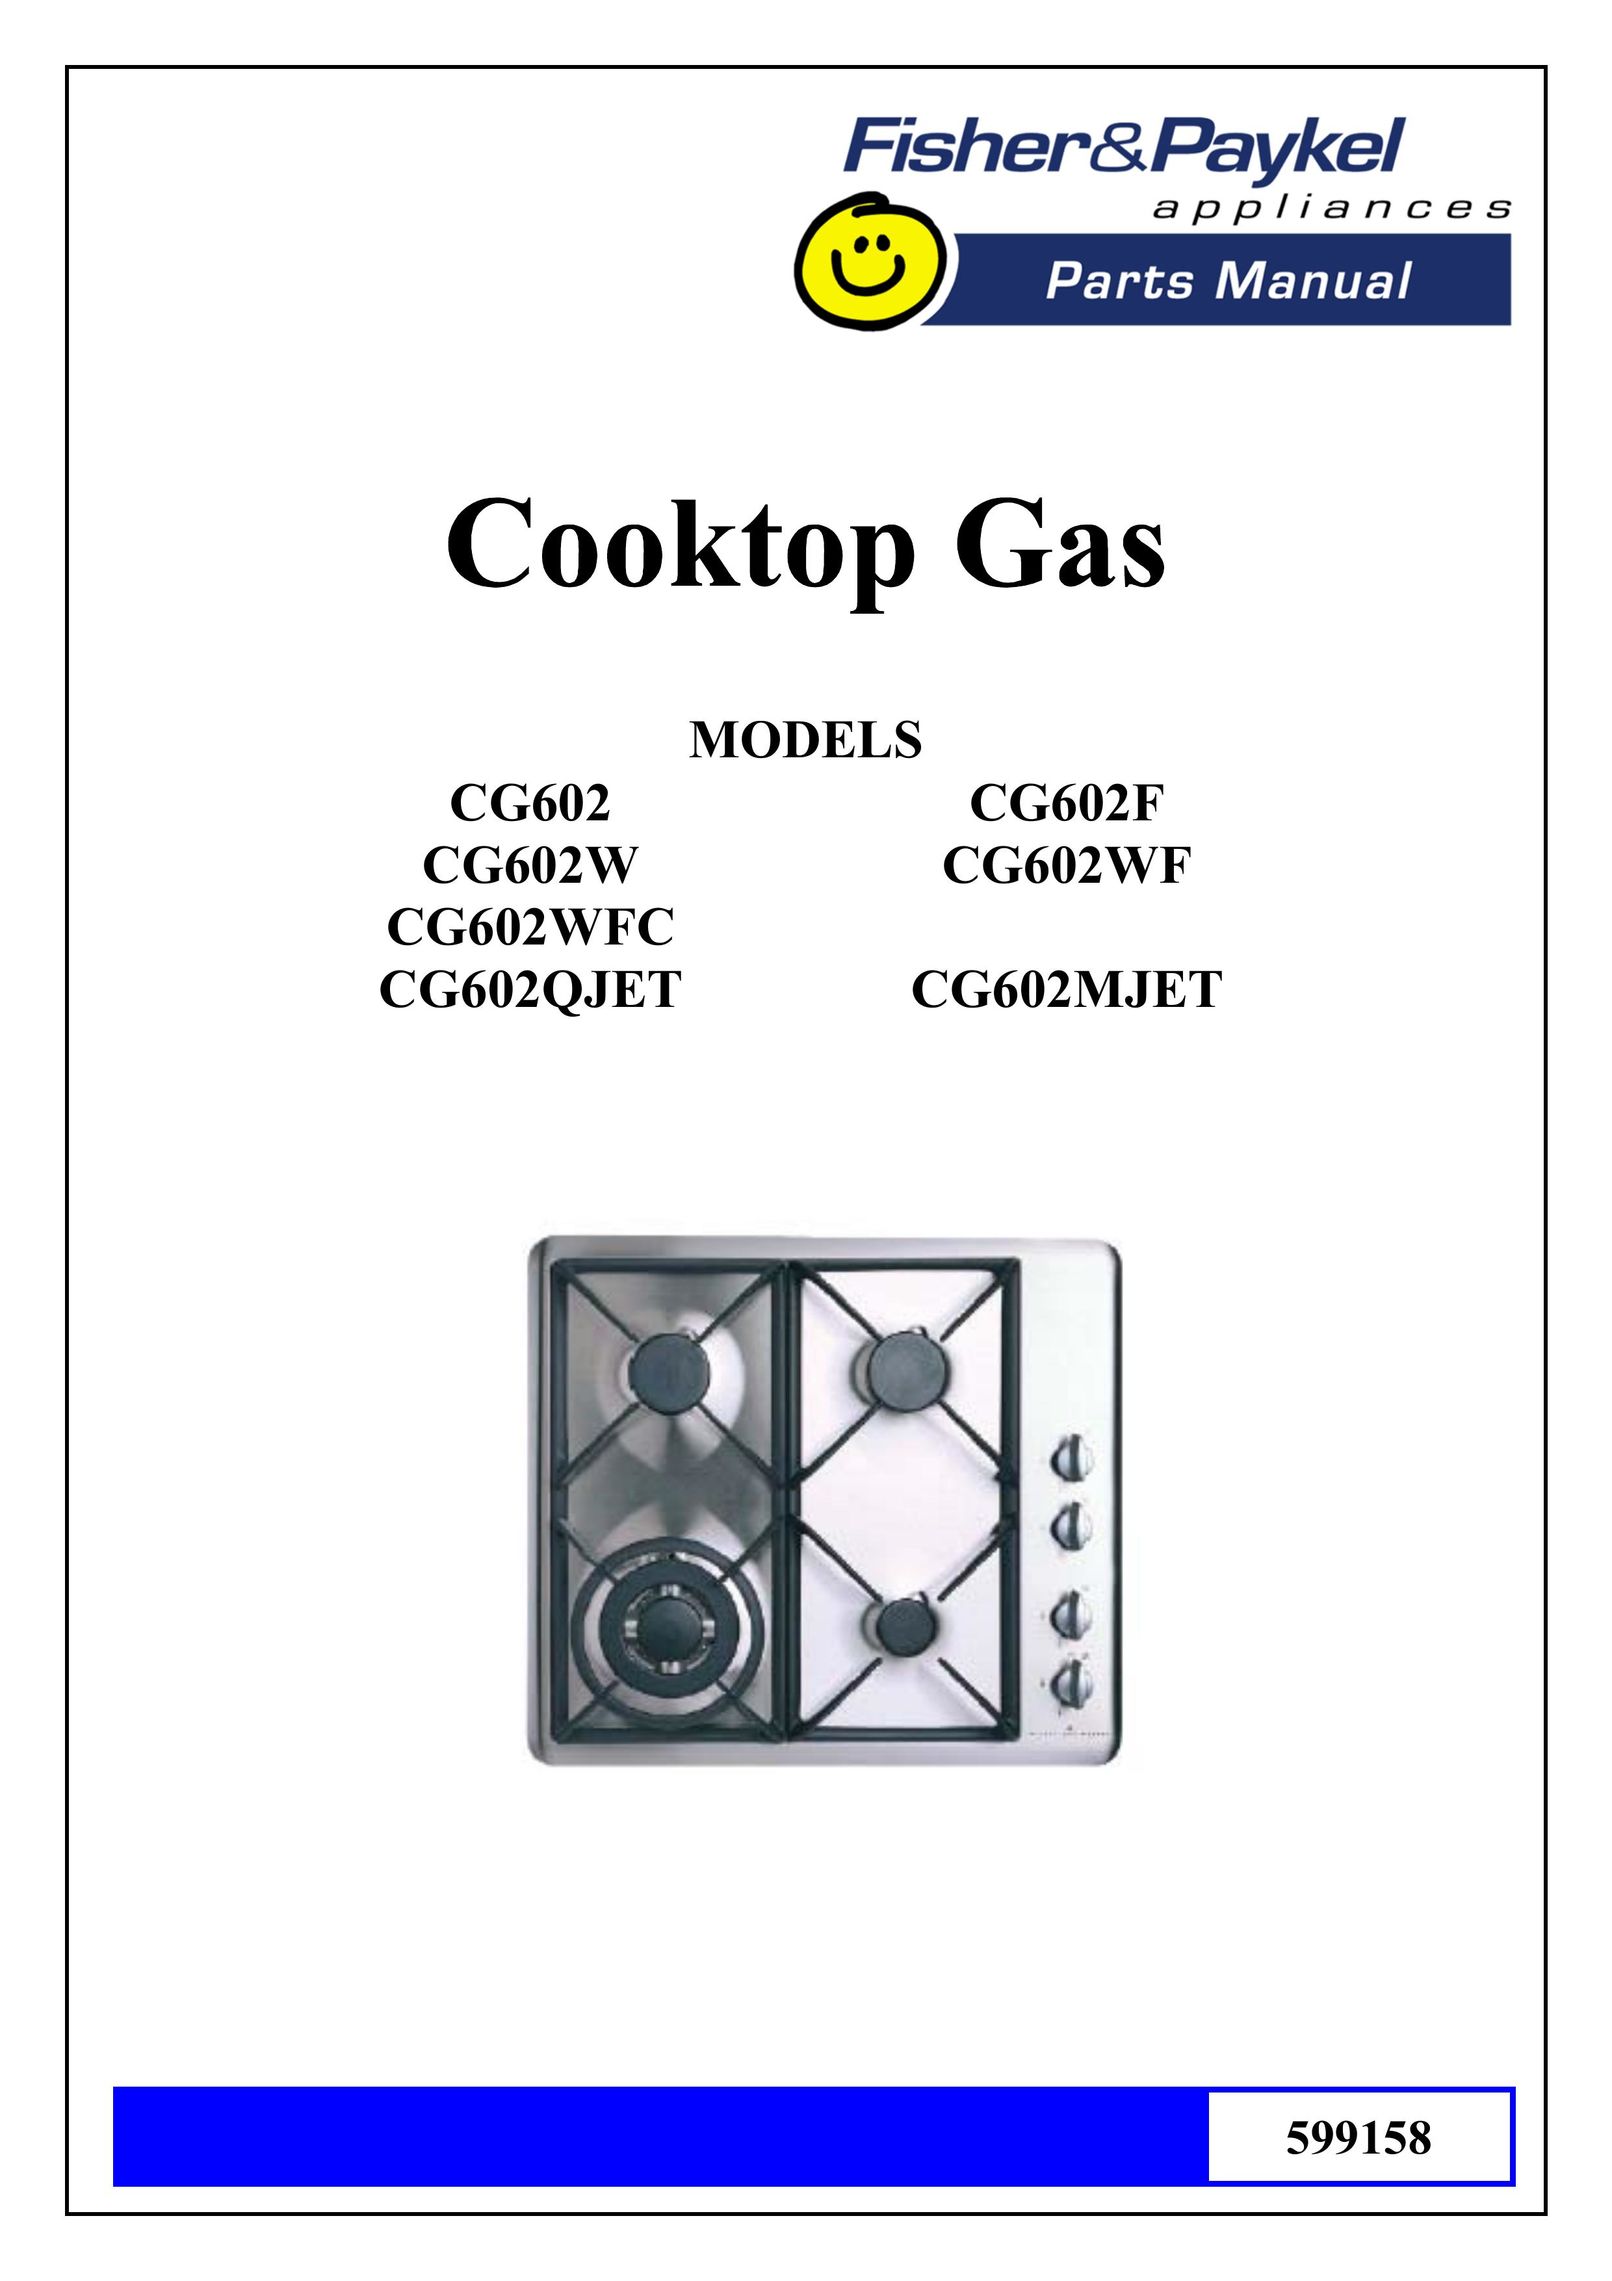 Fisher & Paykel CG602W Cooktop User Manual